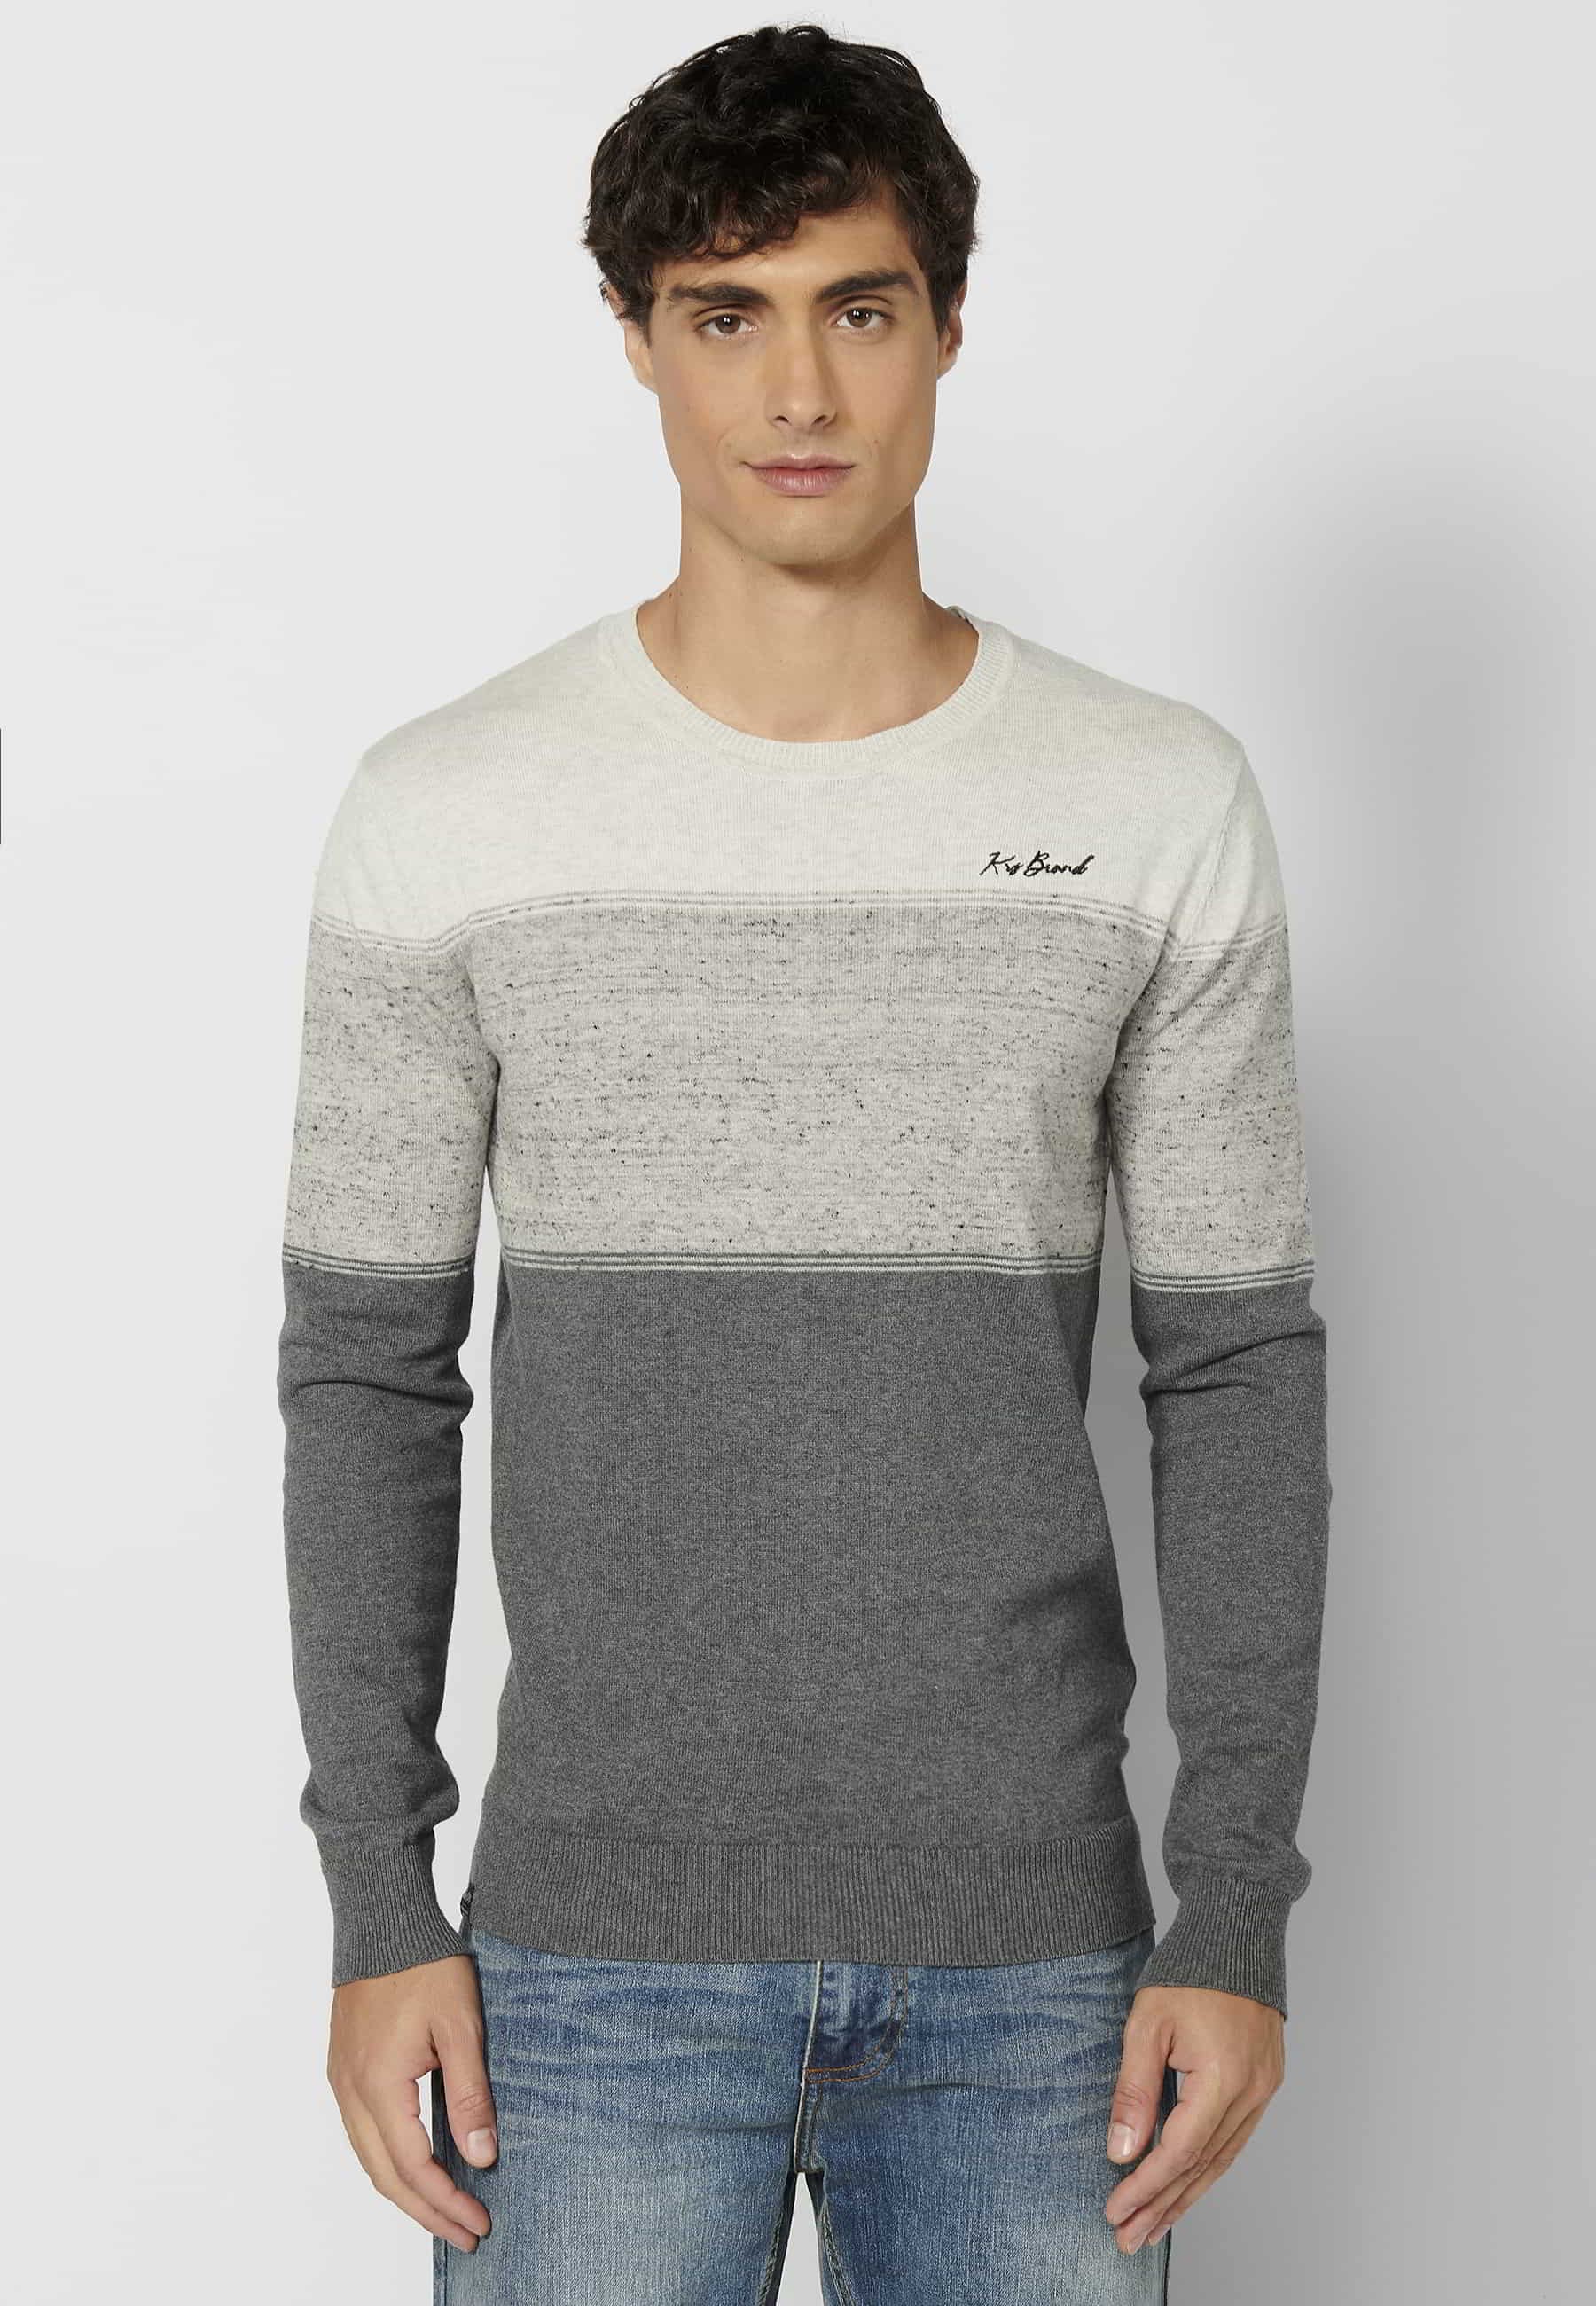 Men's Gray Round Neck Long Sleeve Cotton Knit Sweater 5